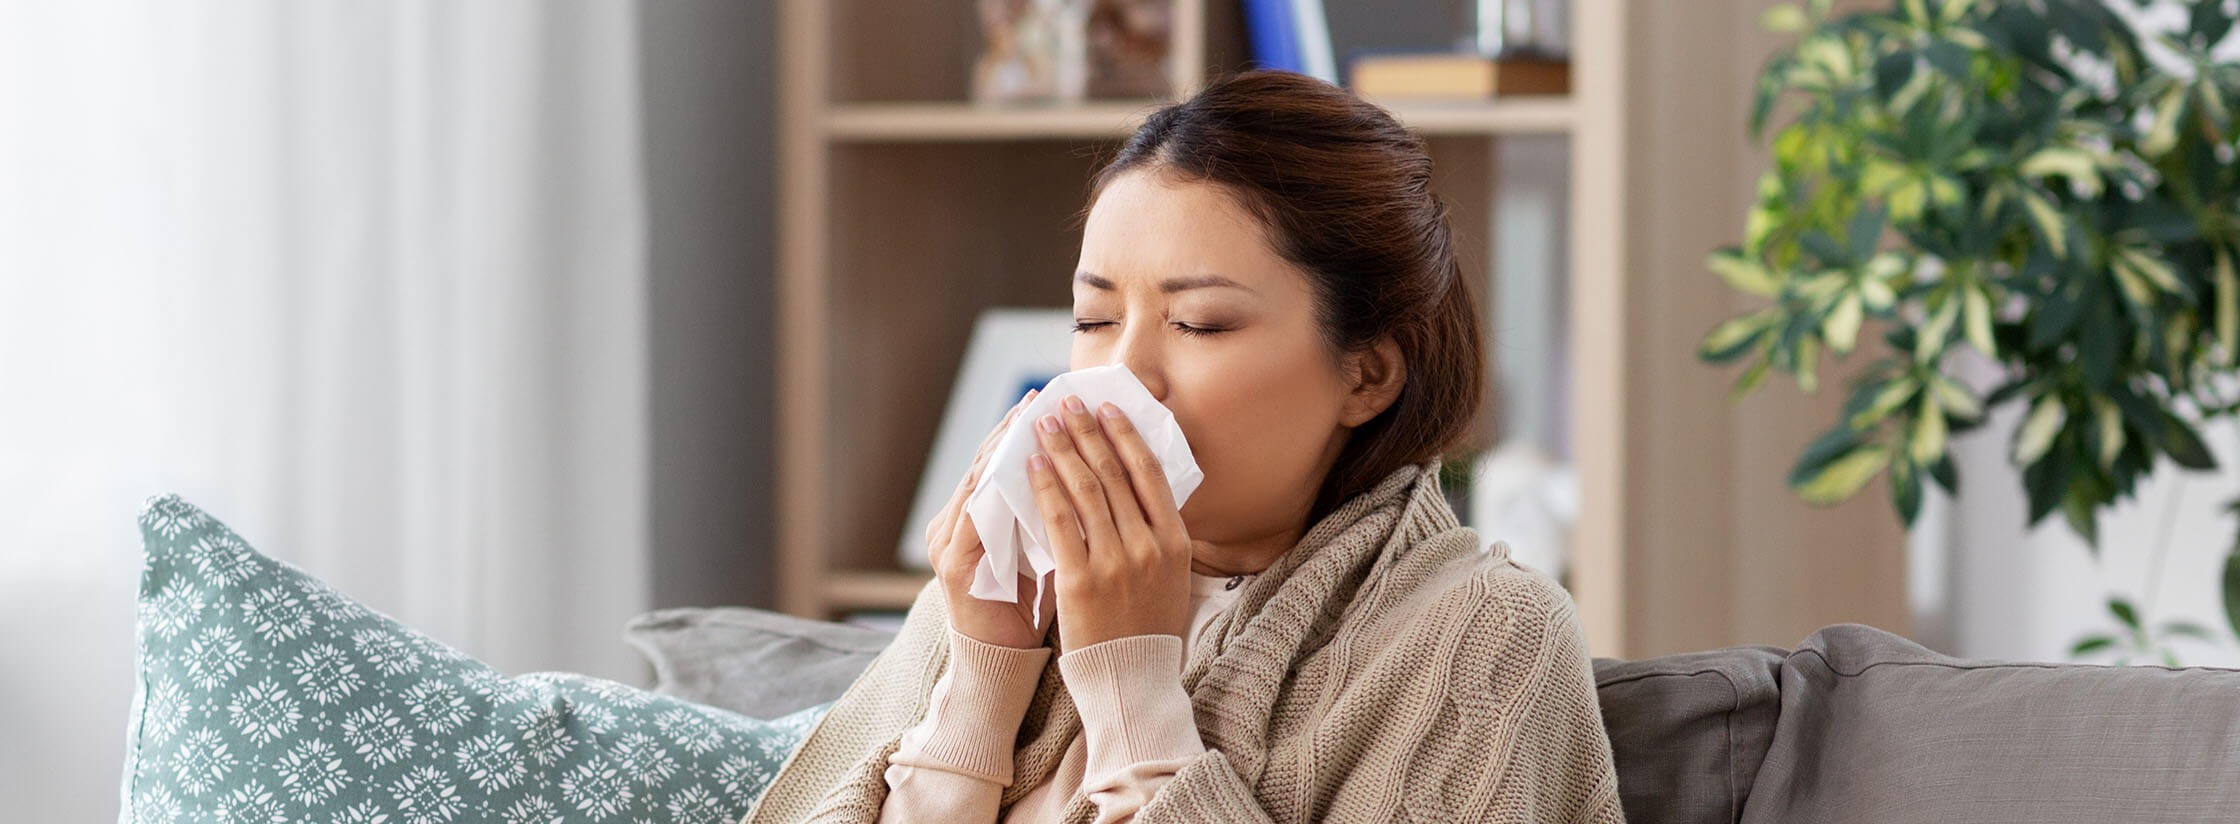 Woman sat on the sofa sneezing into a tissue